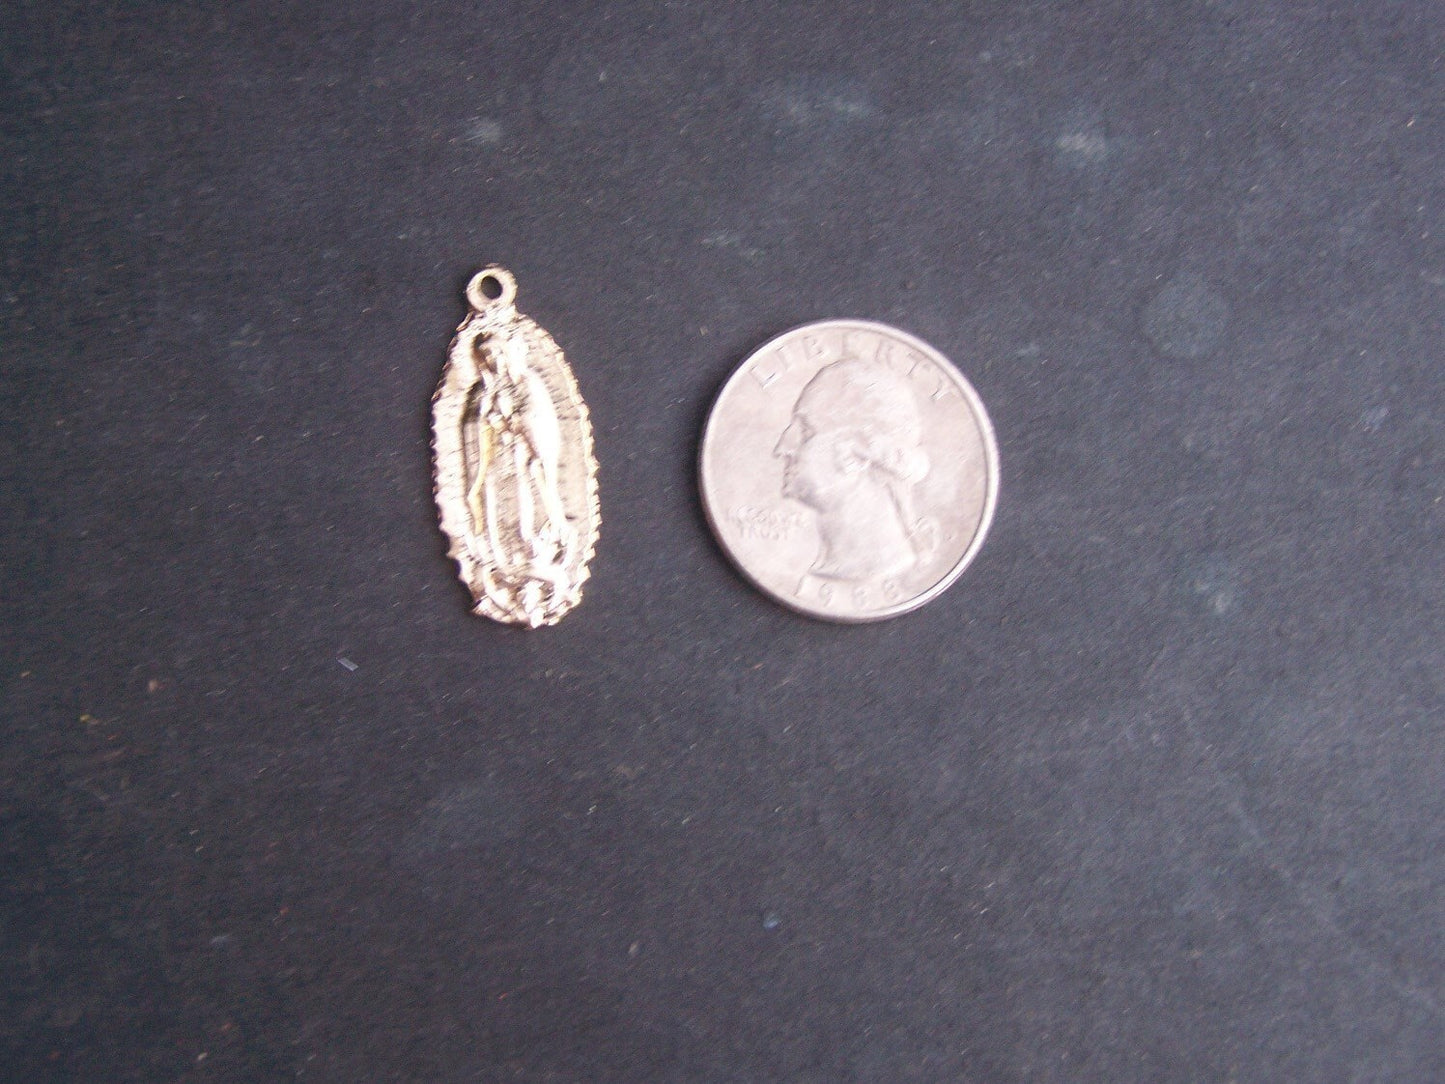 Milagro Lot - Lot of 25 Golden Brass Standard Virgin of Guadalupe Milagros - Mexico